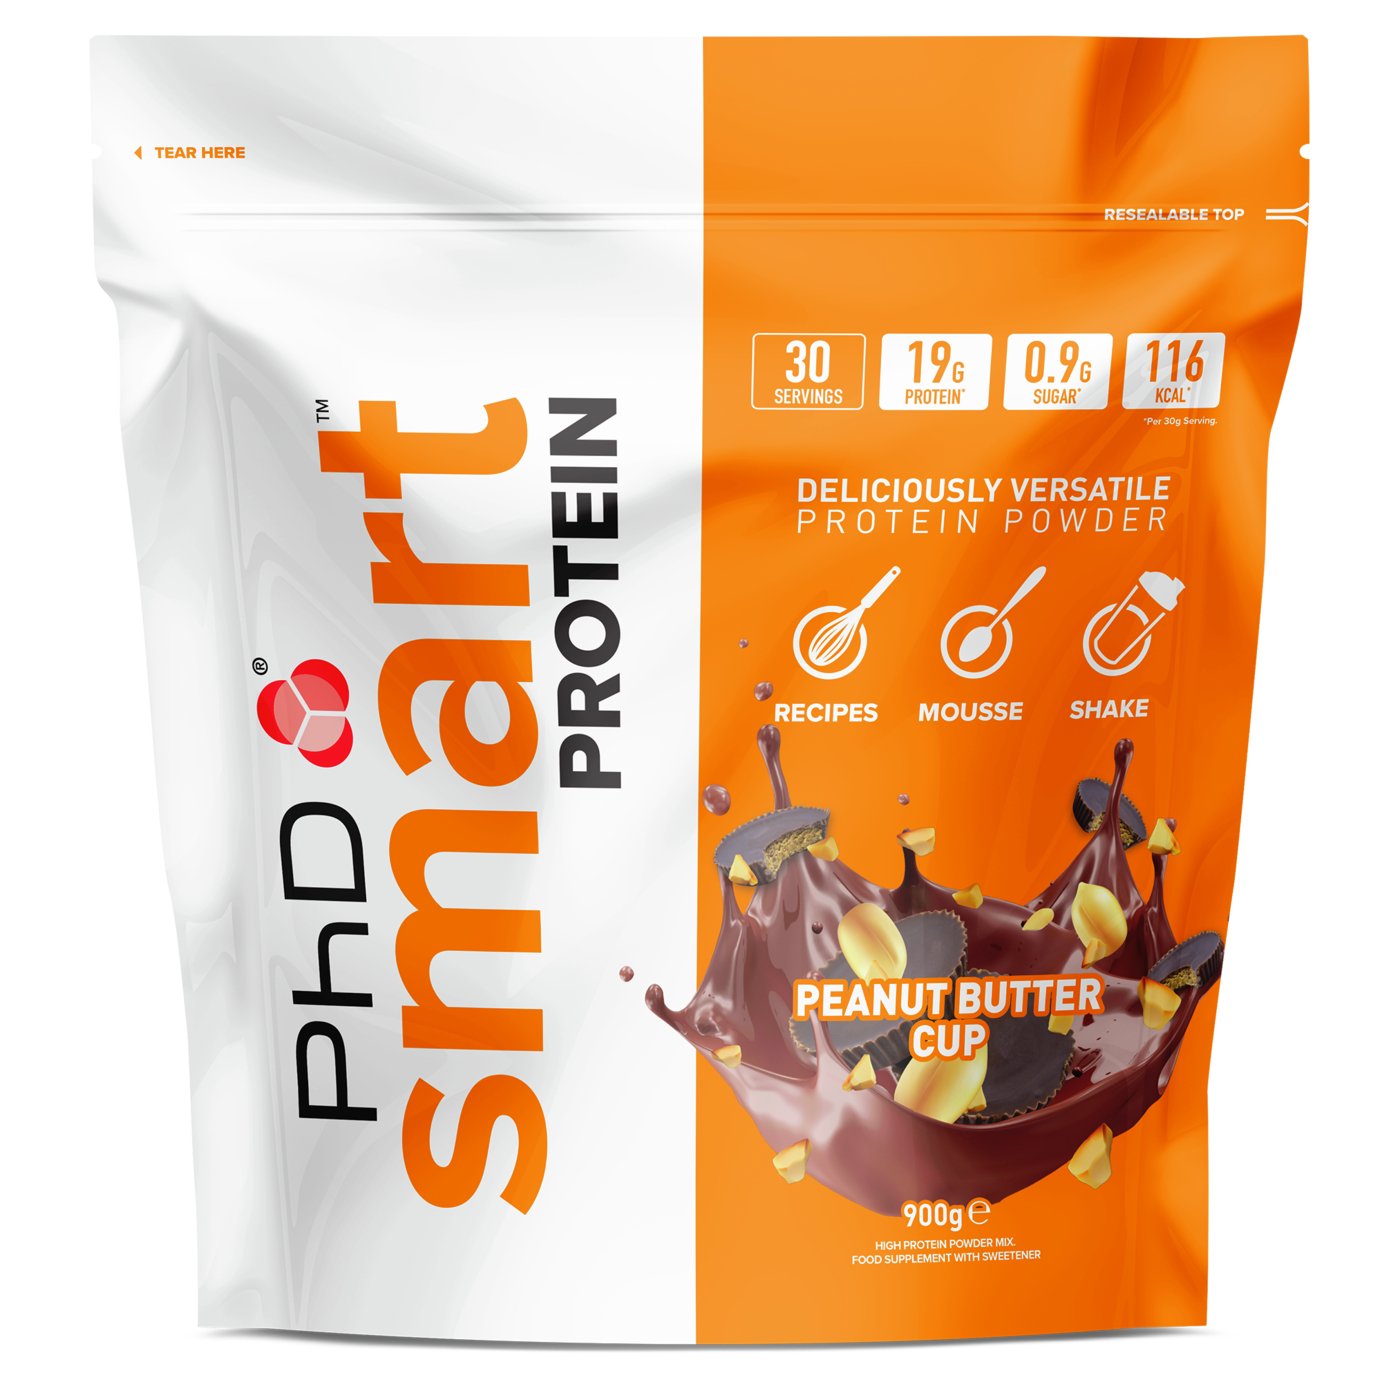 PHD Peanut Butter Cup Smart Protein Powder review